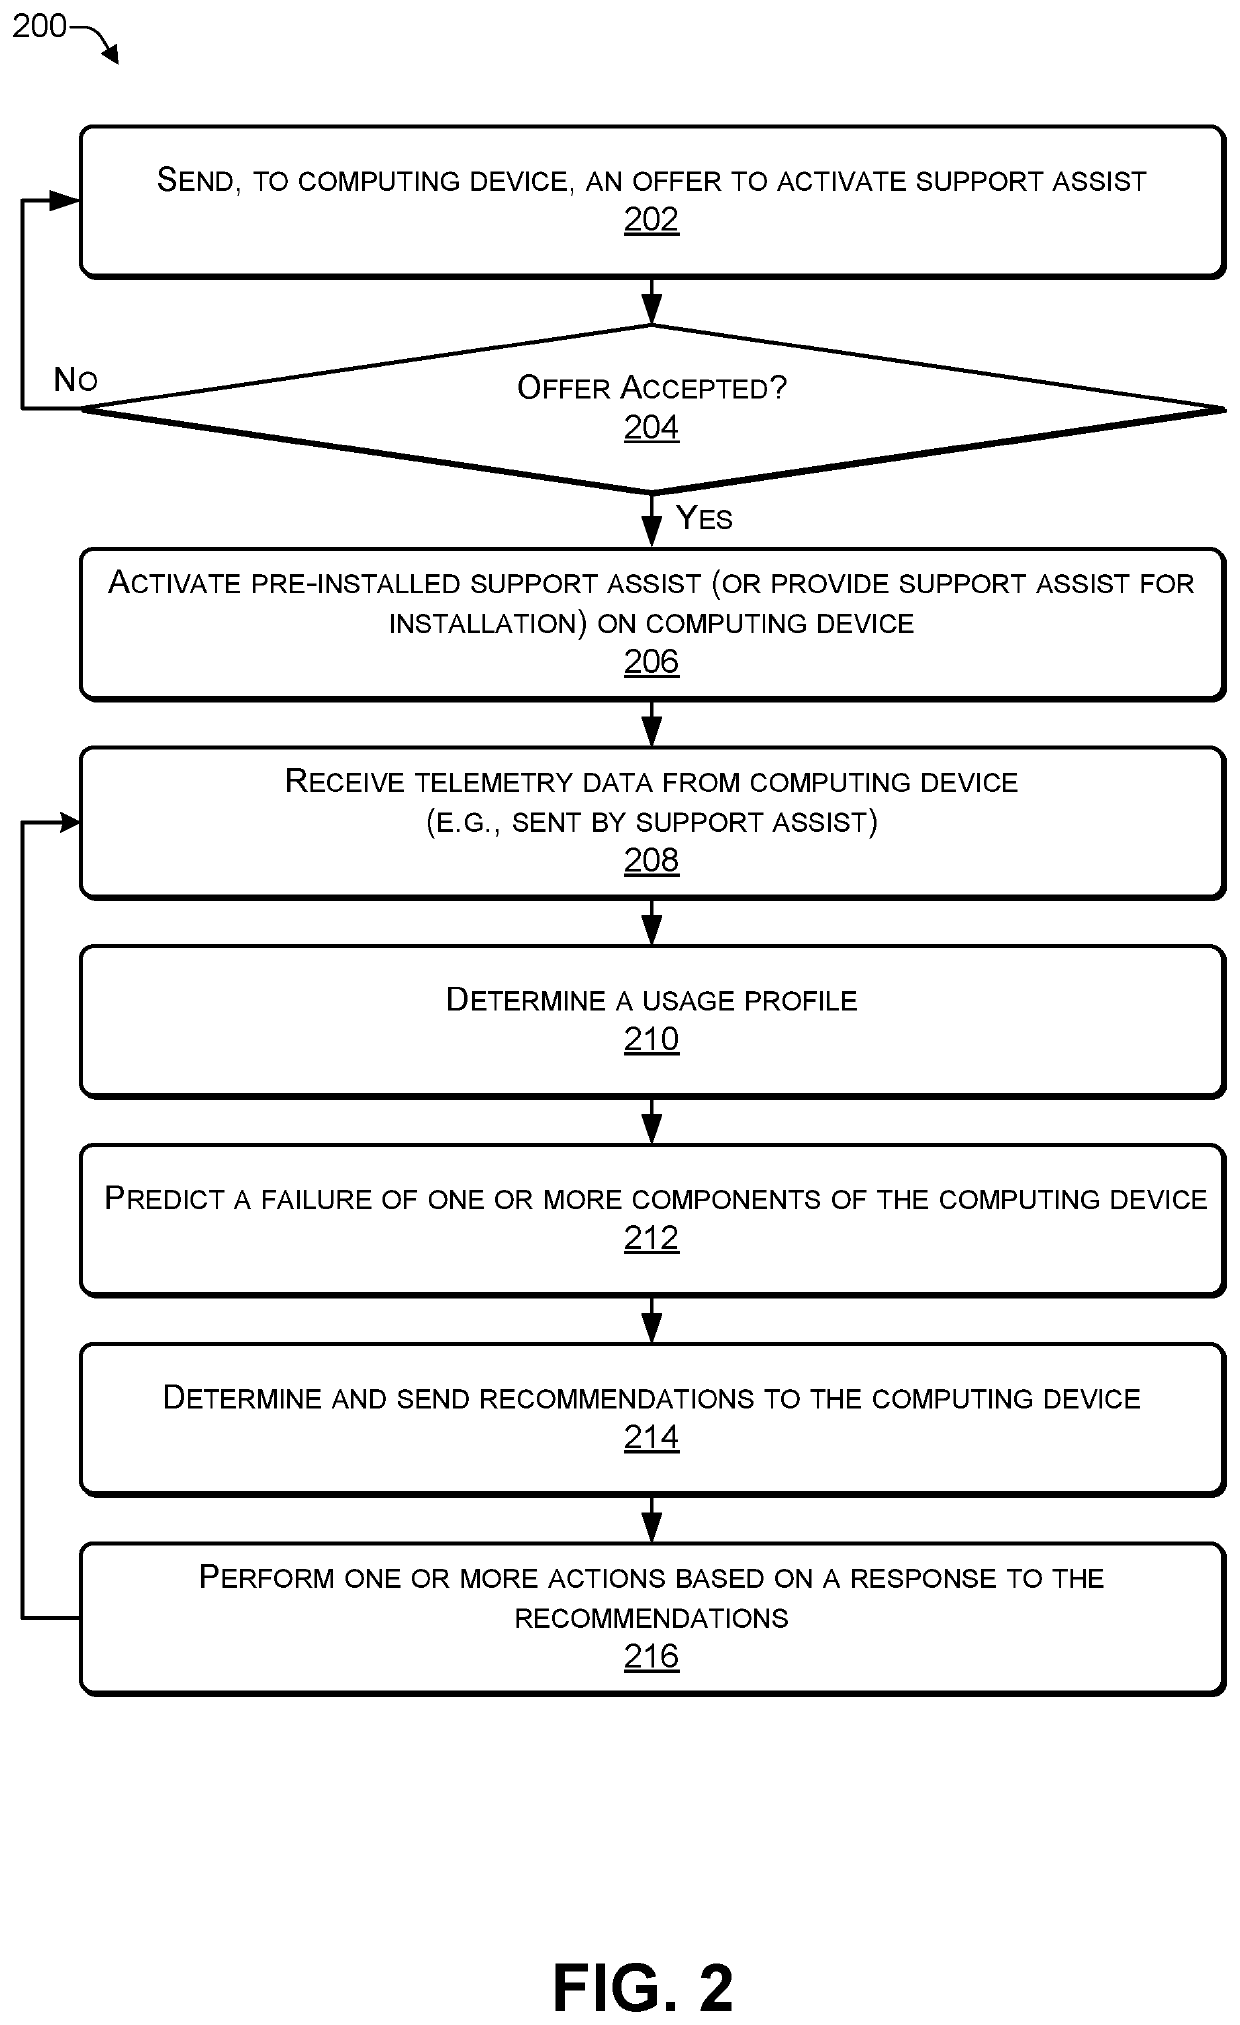 Using machine learning to predict a usage profile and recommendations associated with a computing device